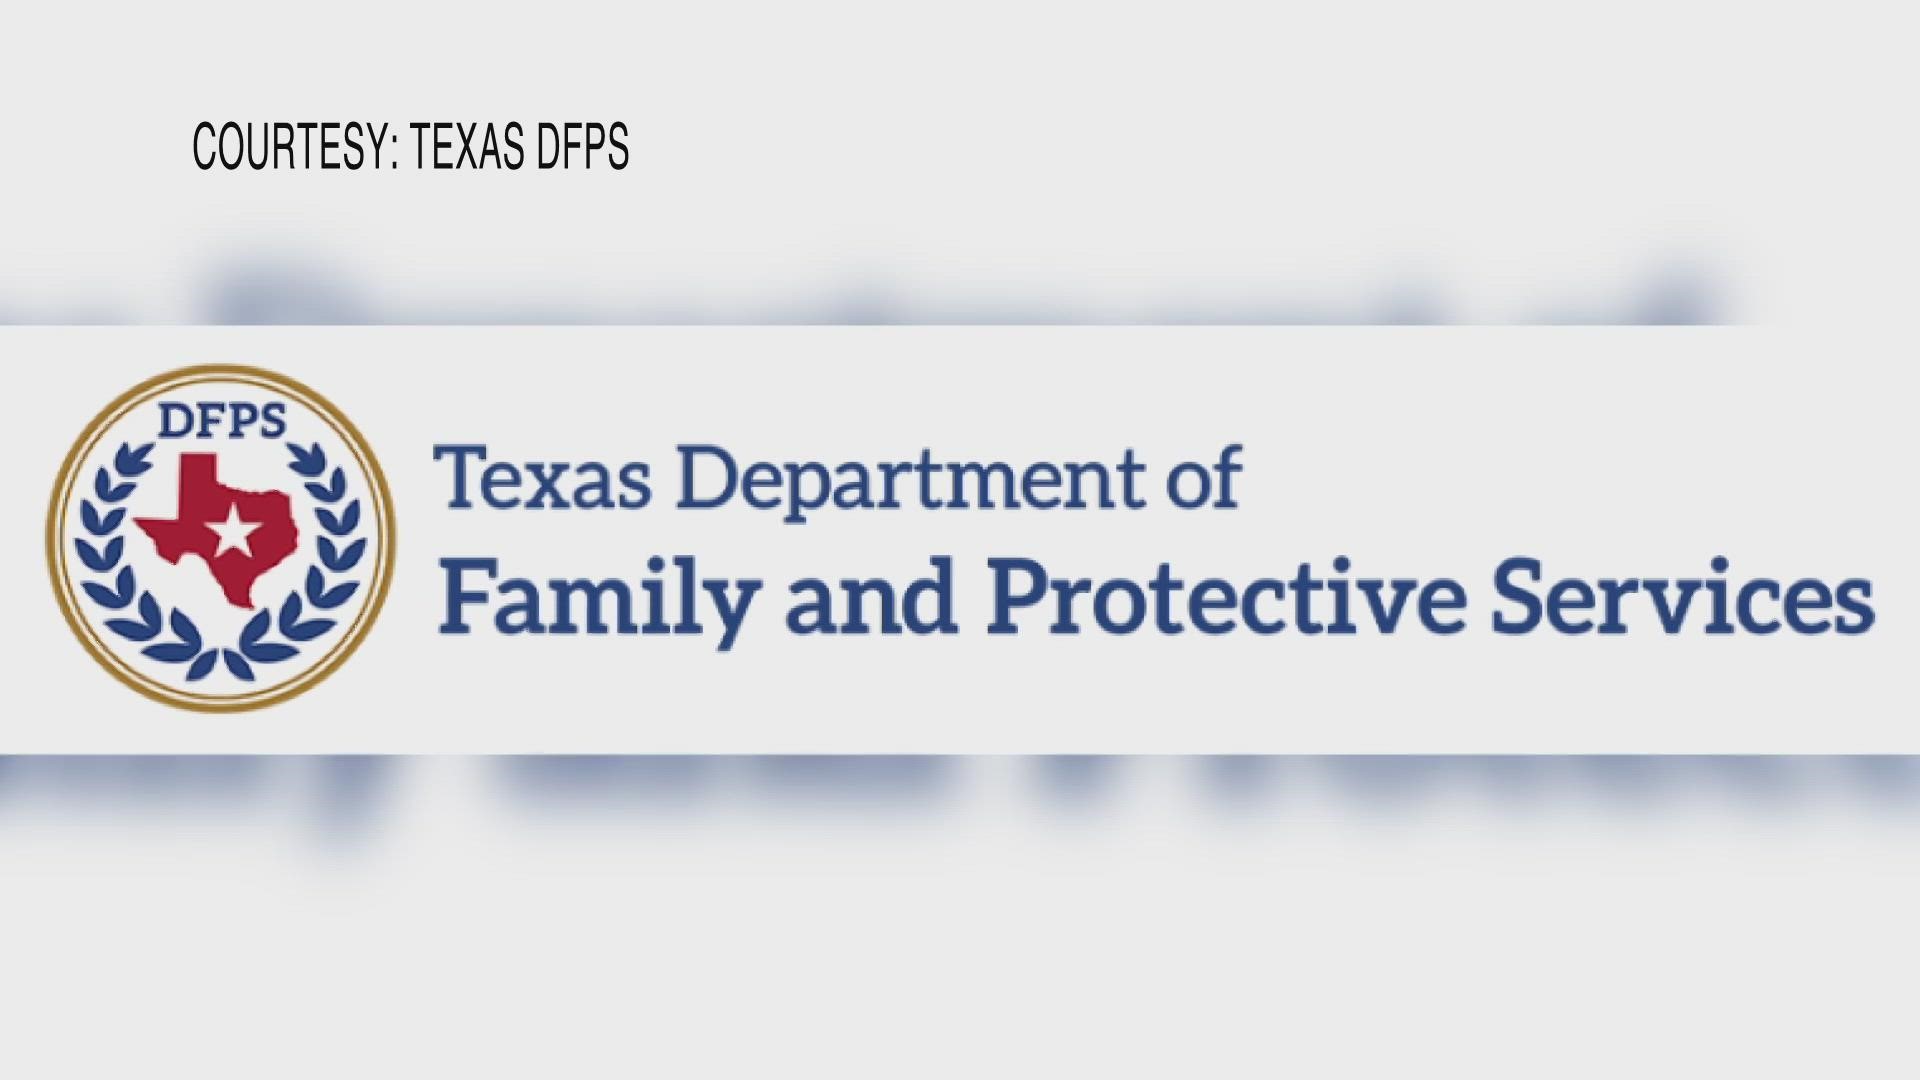 Under state custody, the Texas Department of Family and Protective Services must perform certain health tests.